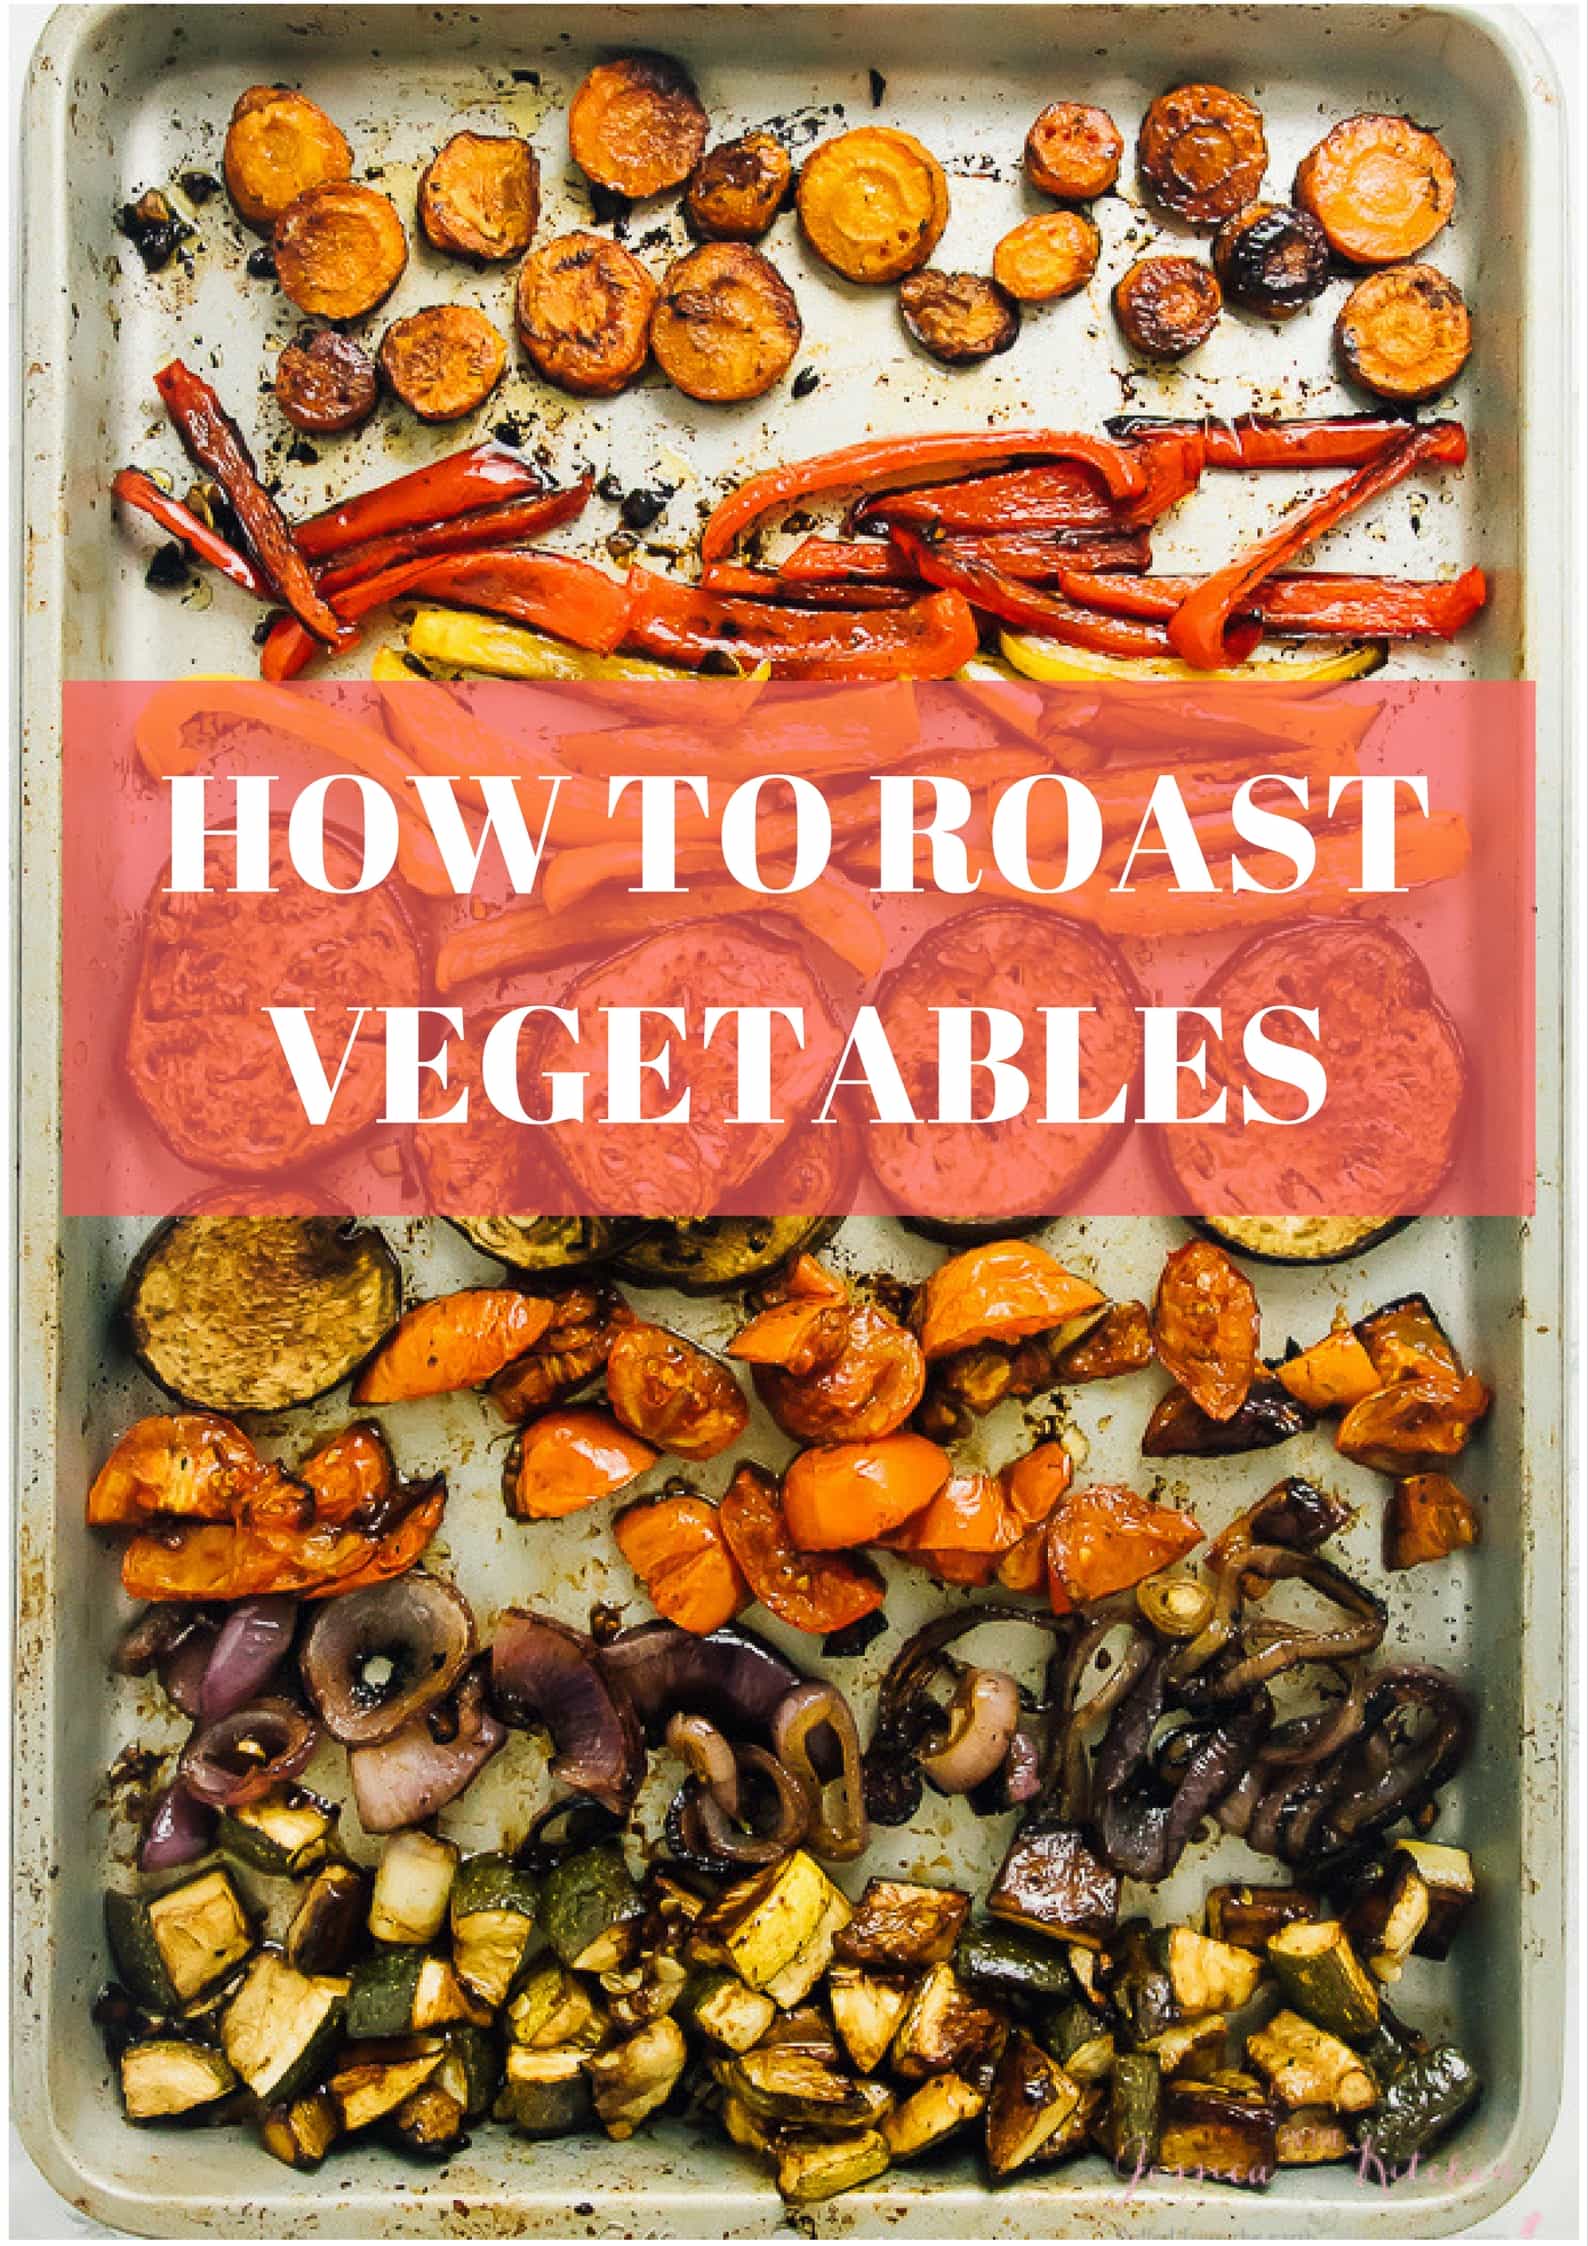 Roast vegetables on a baking sheet with text.